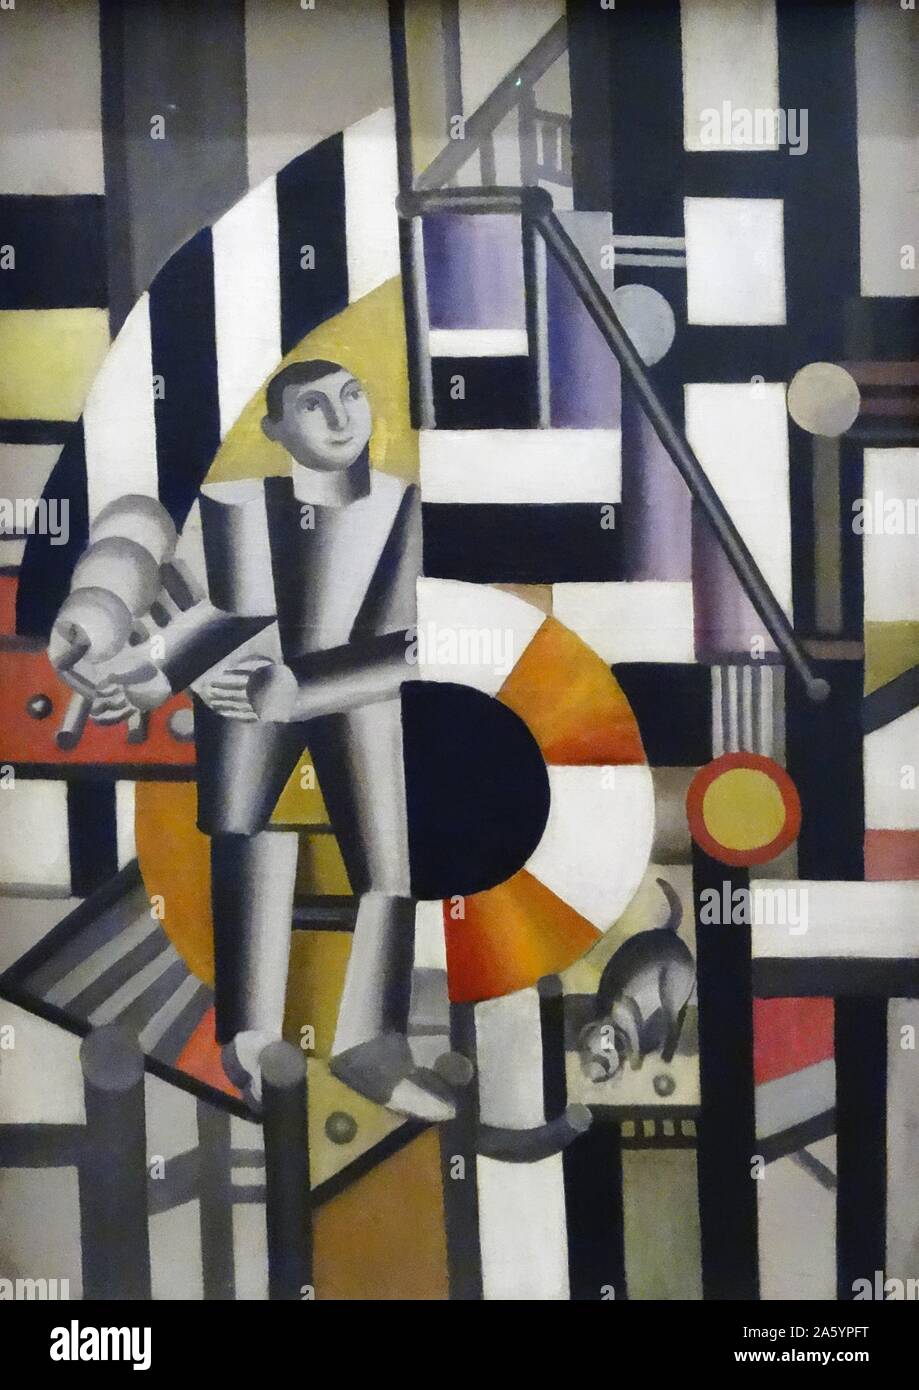 Painting titled 'The Man with the Pipe' by Fernand Léger (1881-1955) French painter, sculptor, and filmmaker. Dated 1920 Stock Photo